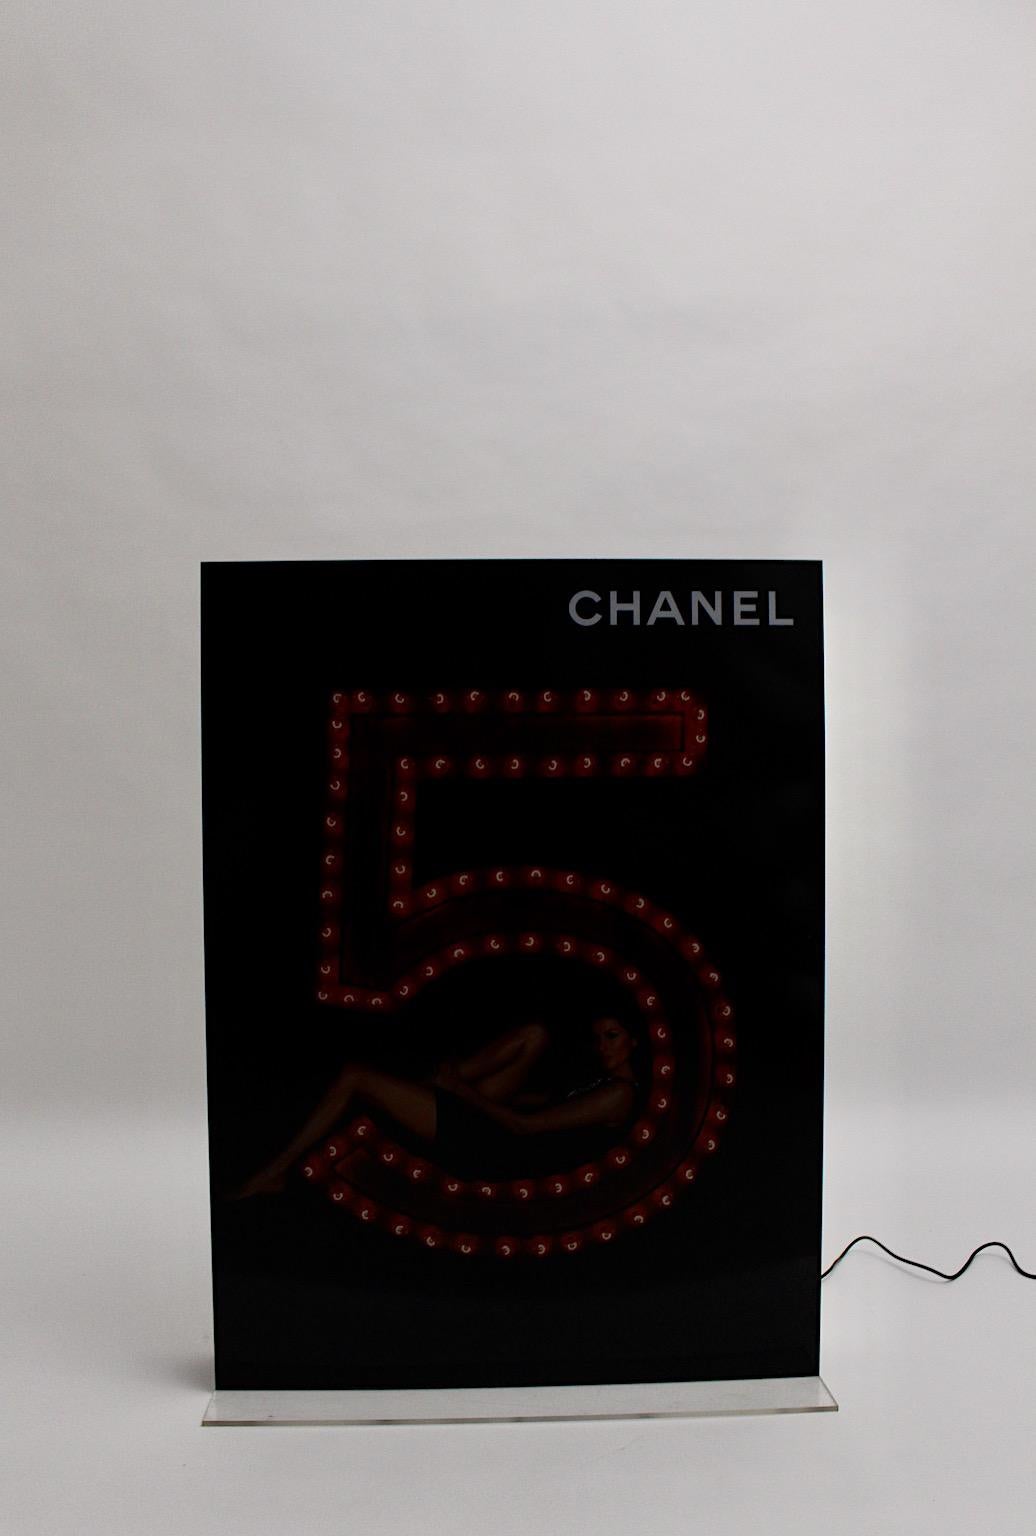 Acrylic Advertising Vintage Lighting Display Chanel No. 5 Black Gold For Sale